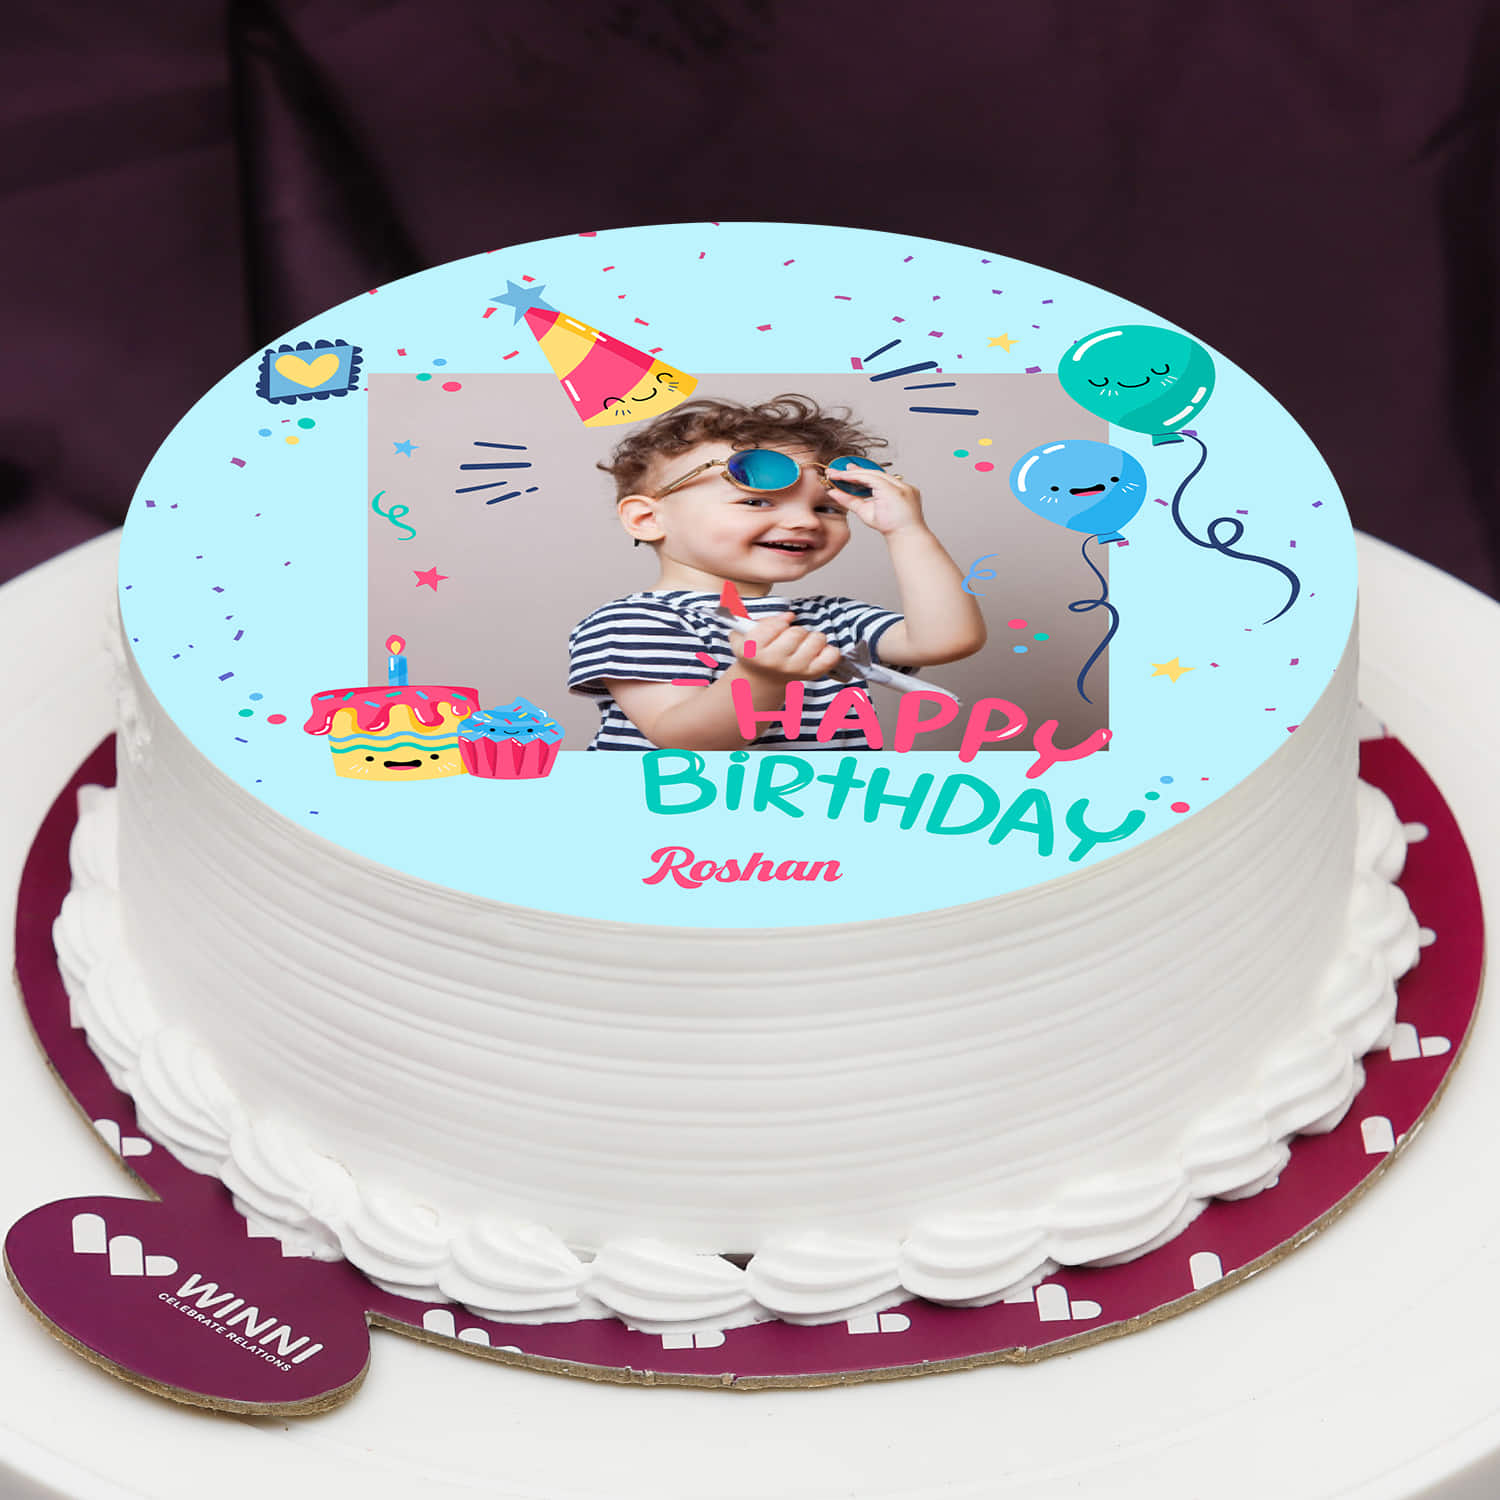 Boy On Boobs Naughty Fondant Cake In ₹3,699.00 And Get Free Delivery In  Delhi NCR » From Theme Cake Store